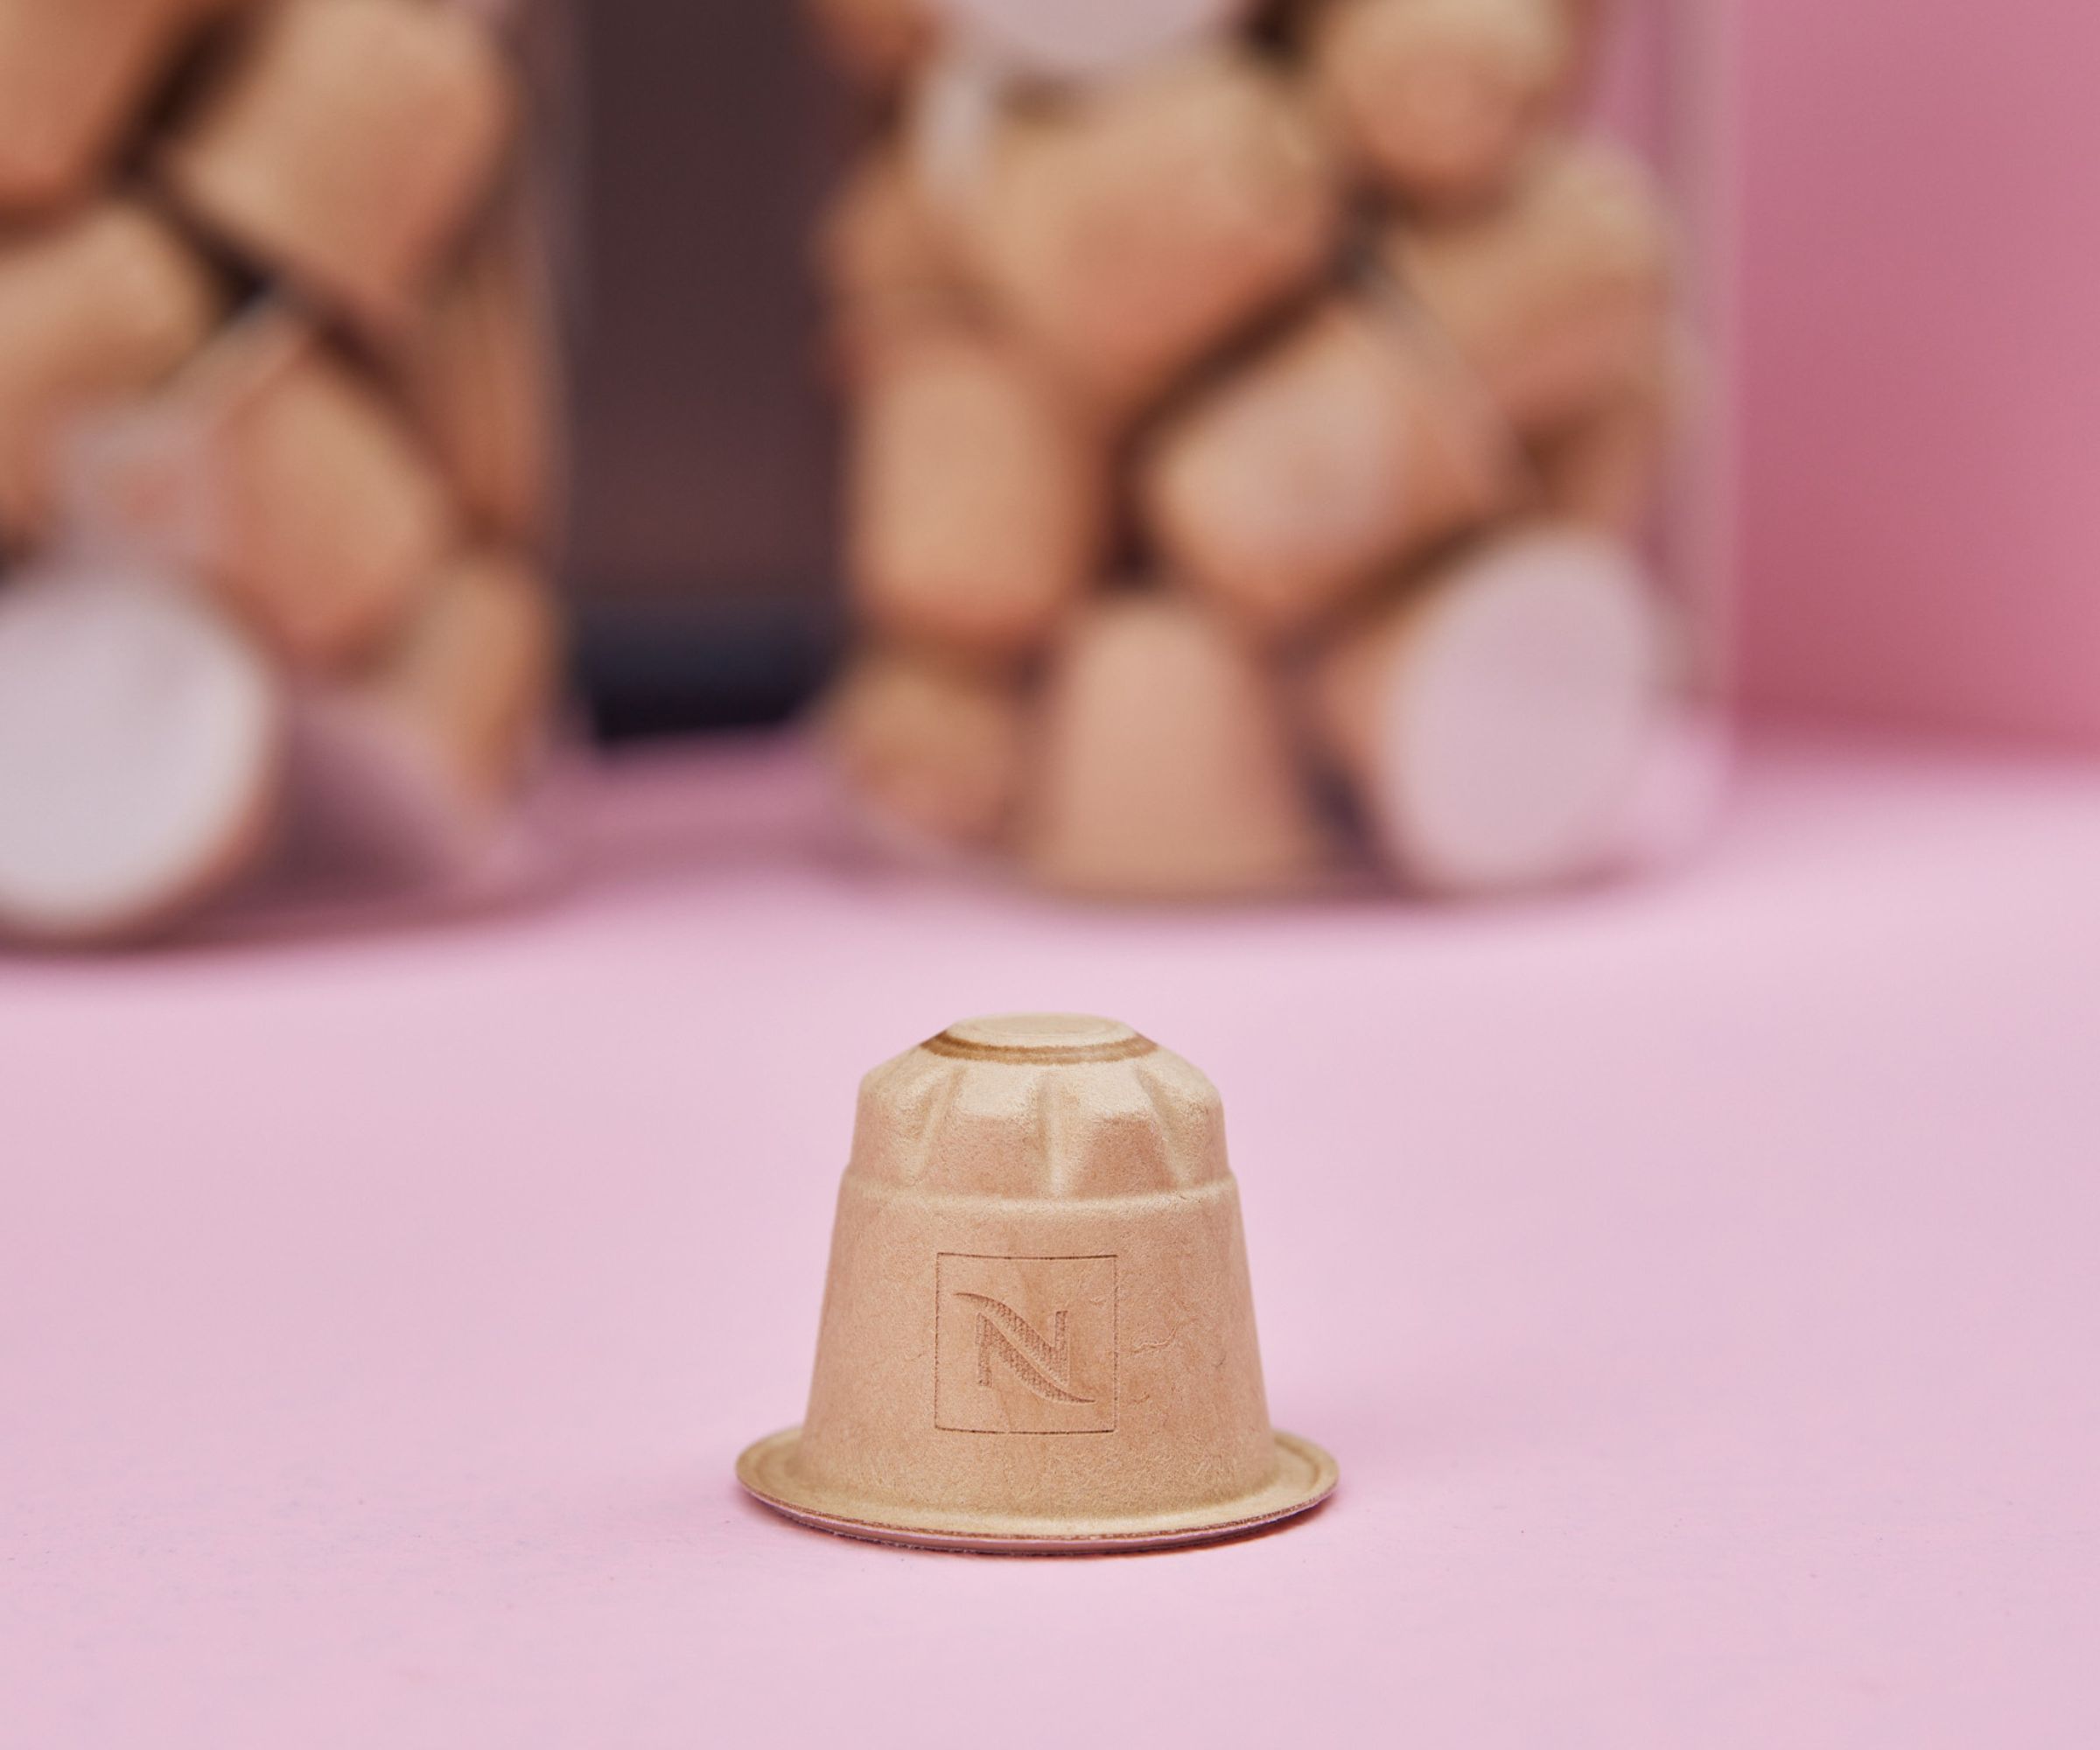 Nespresso paper coffee pod  on a pink surface with jars of coffee pods in the background